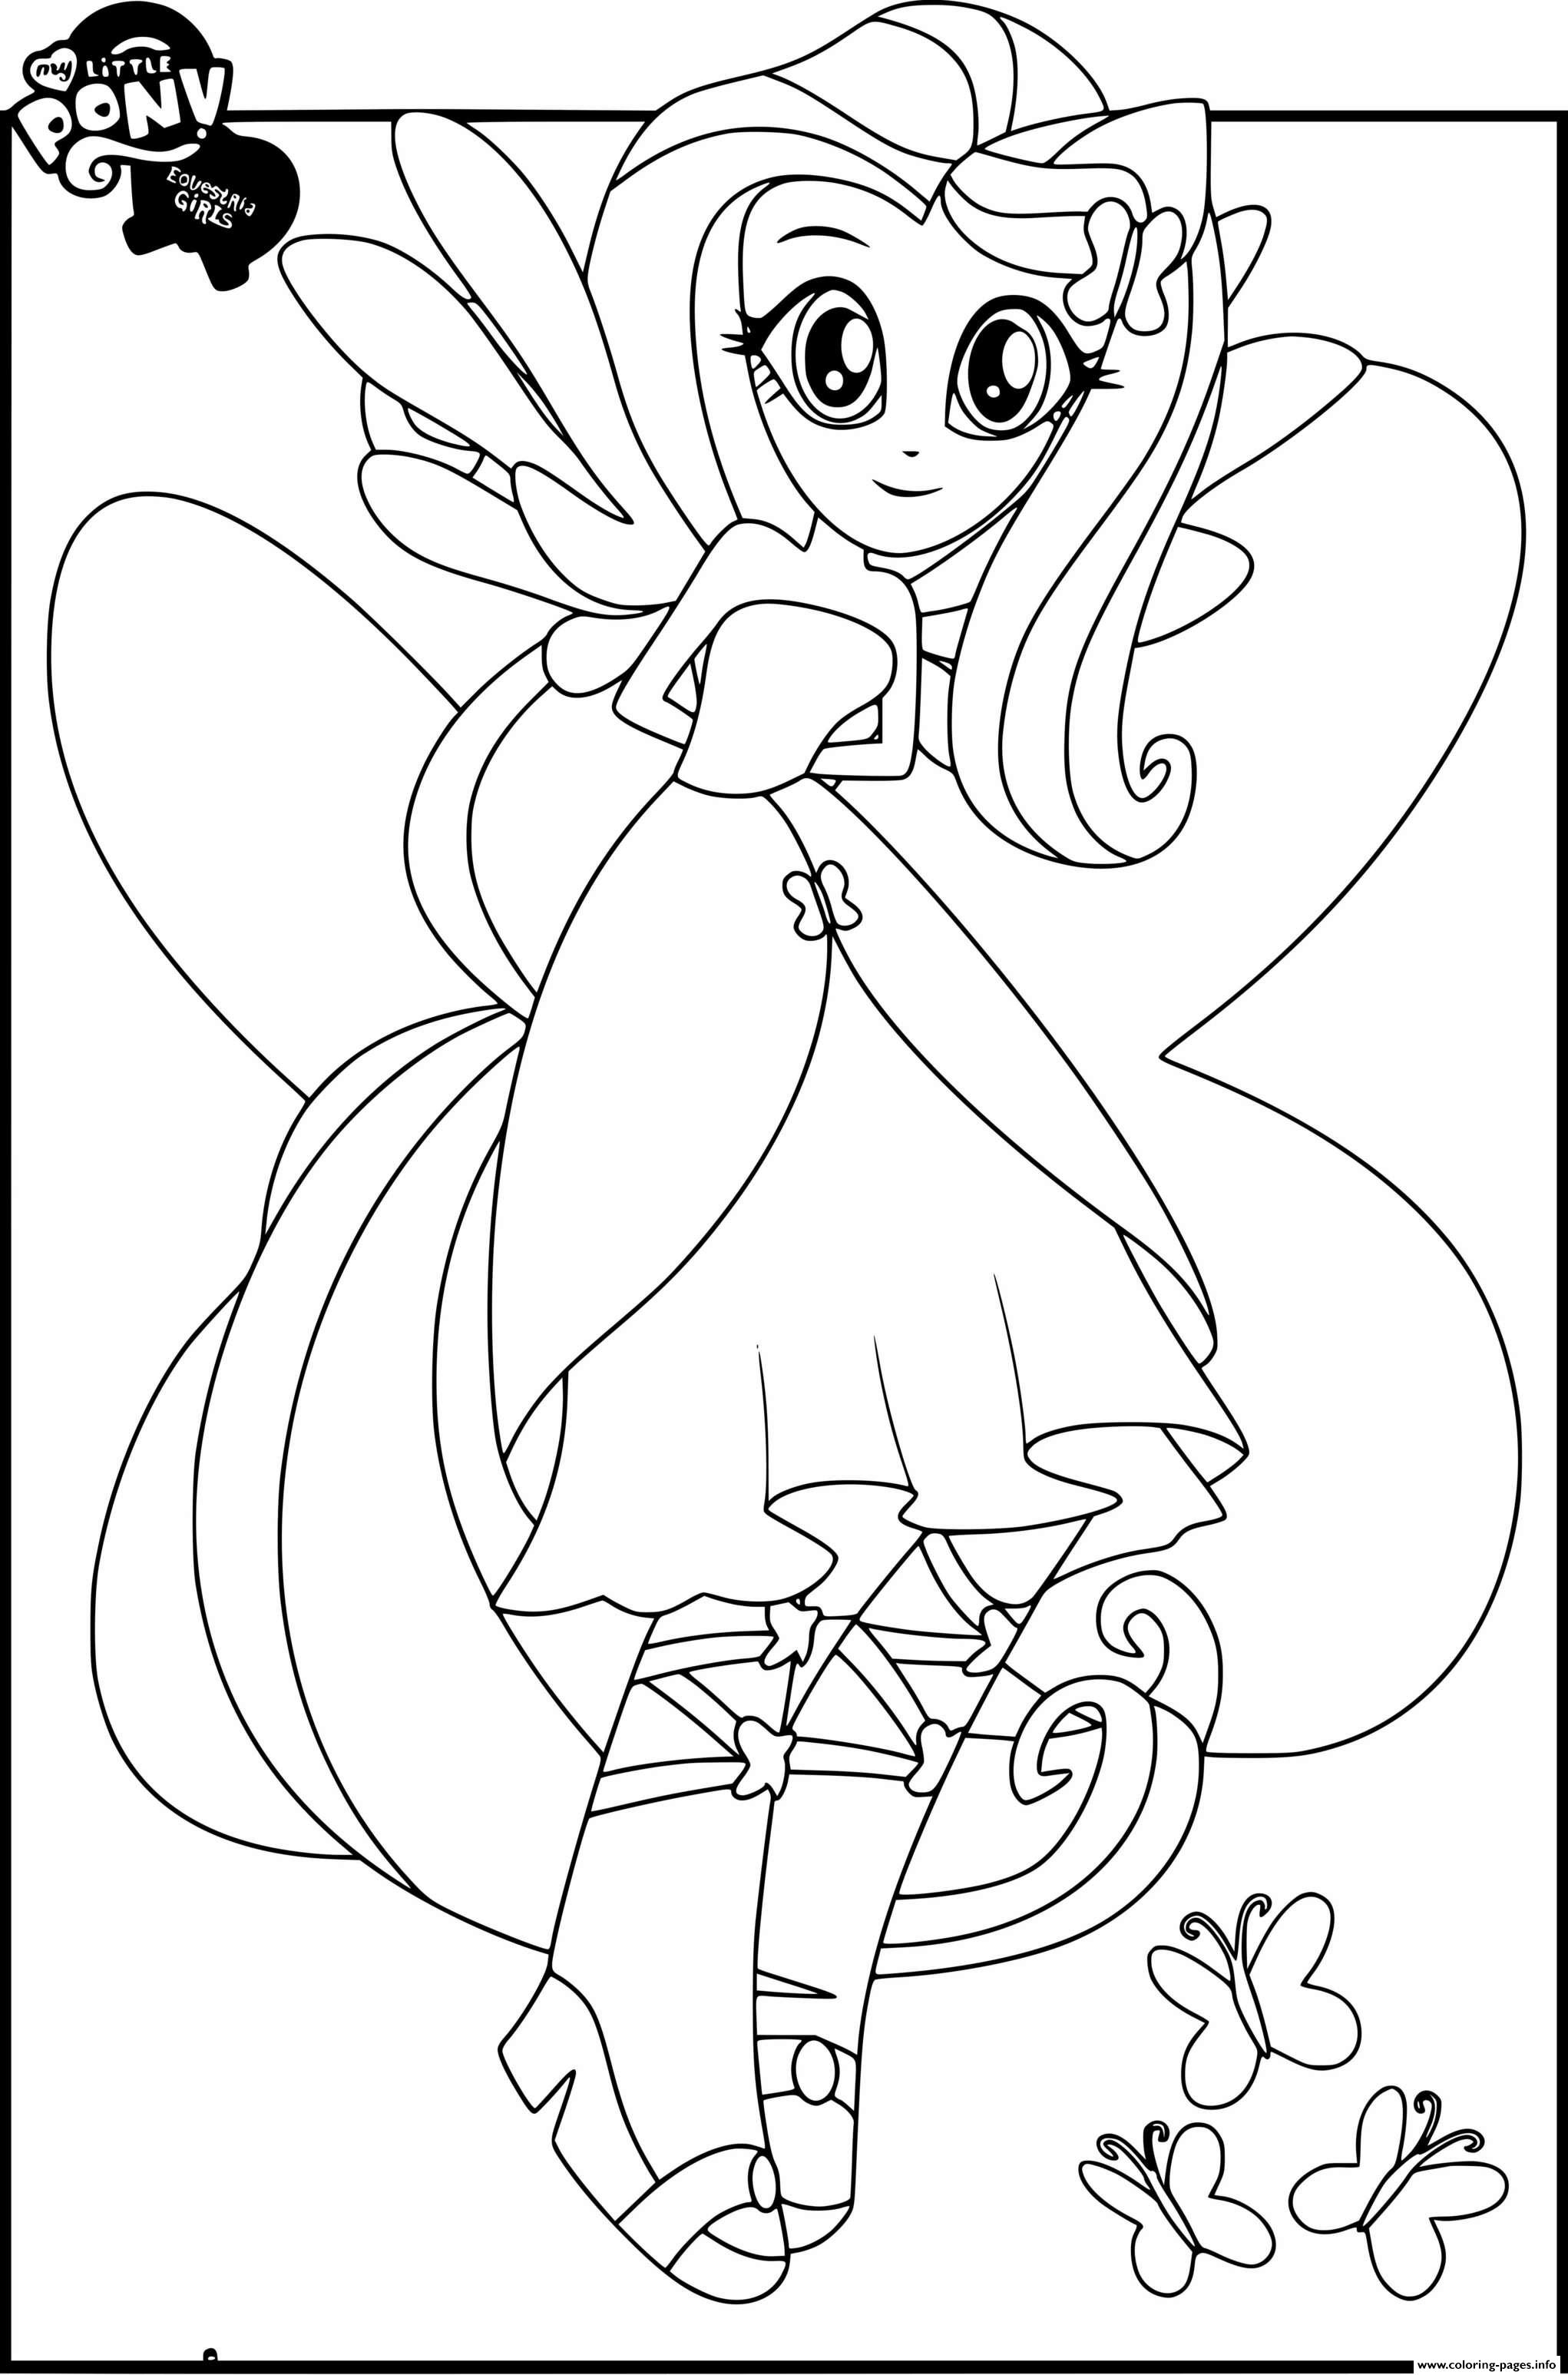 My Little Pony Equestria Girls Fluttershy Coloring Pages Printable